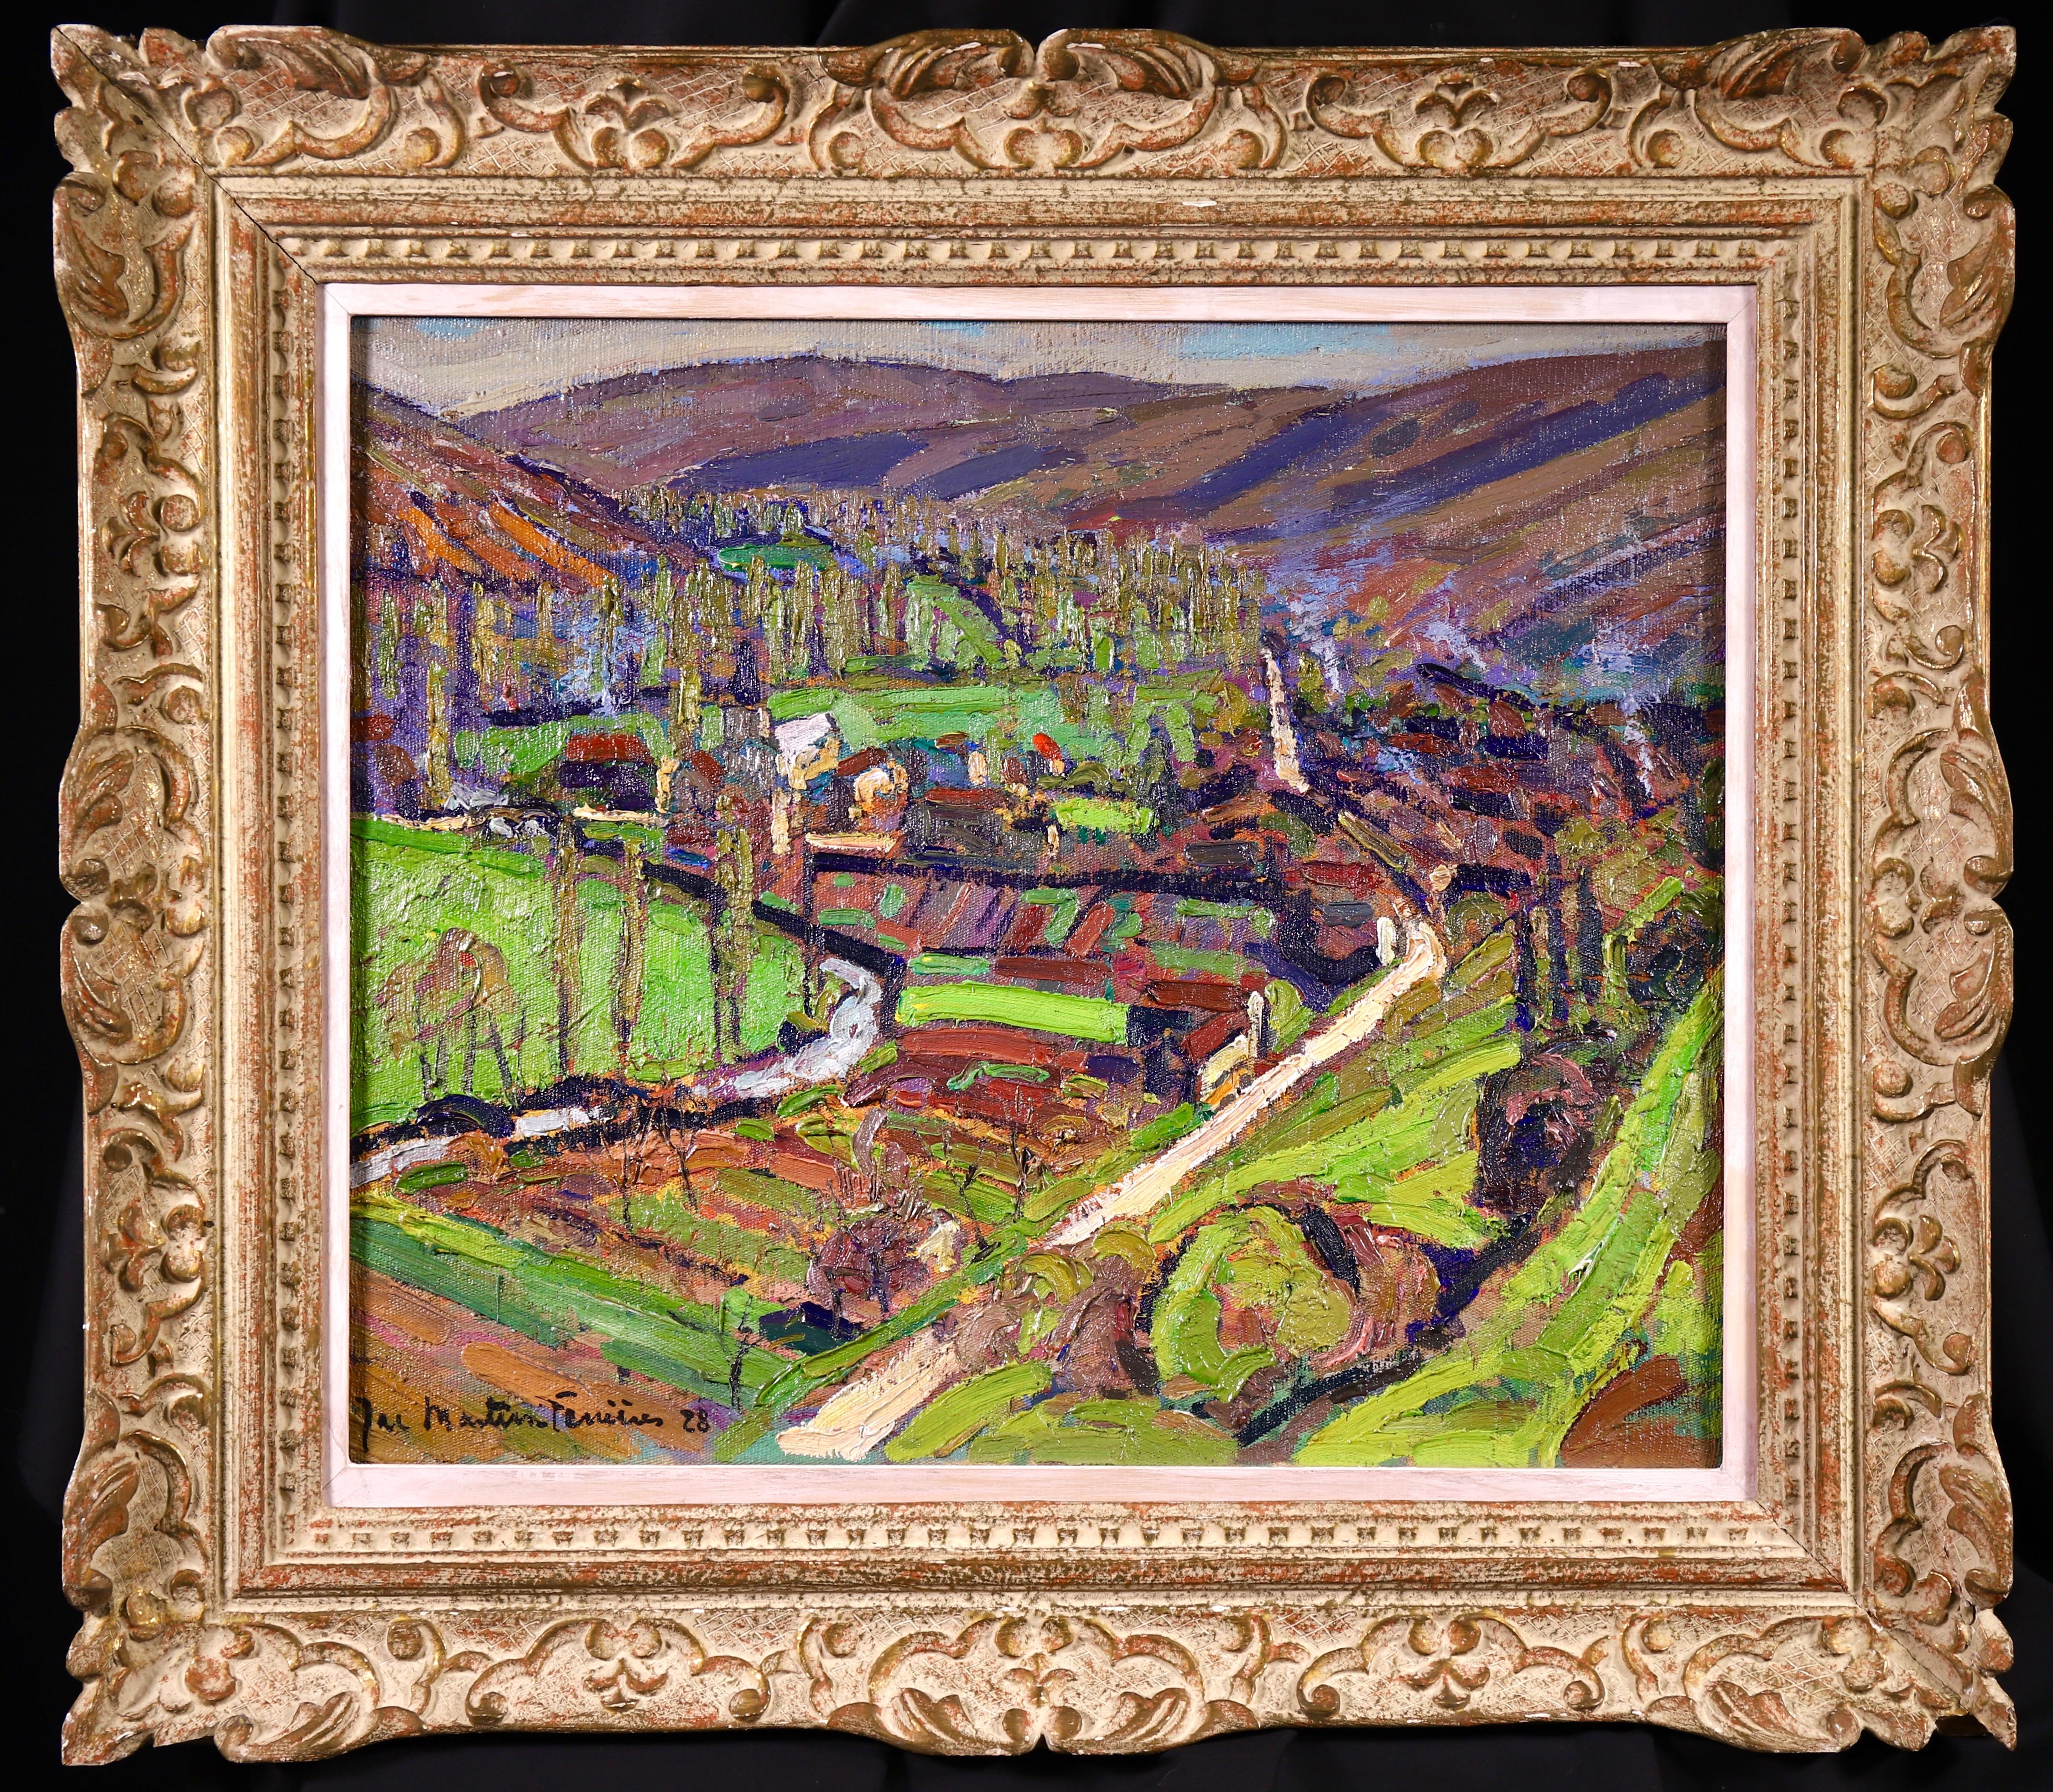 Labastide-du-Vert - 20th Century Oil, Landscape of Provence, France by Ferrieres - Painting by Jacques Martin-Ferrières